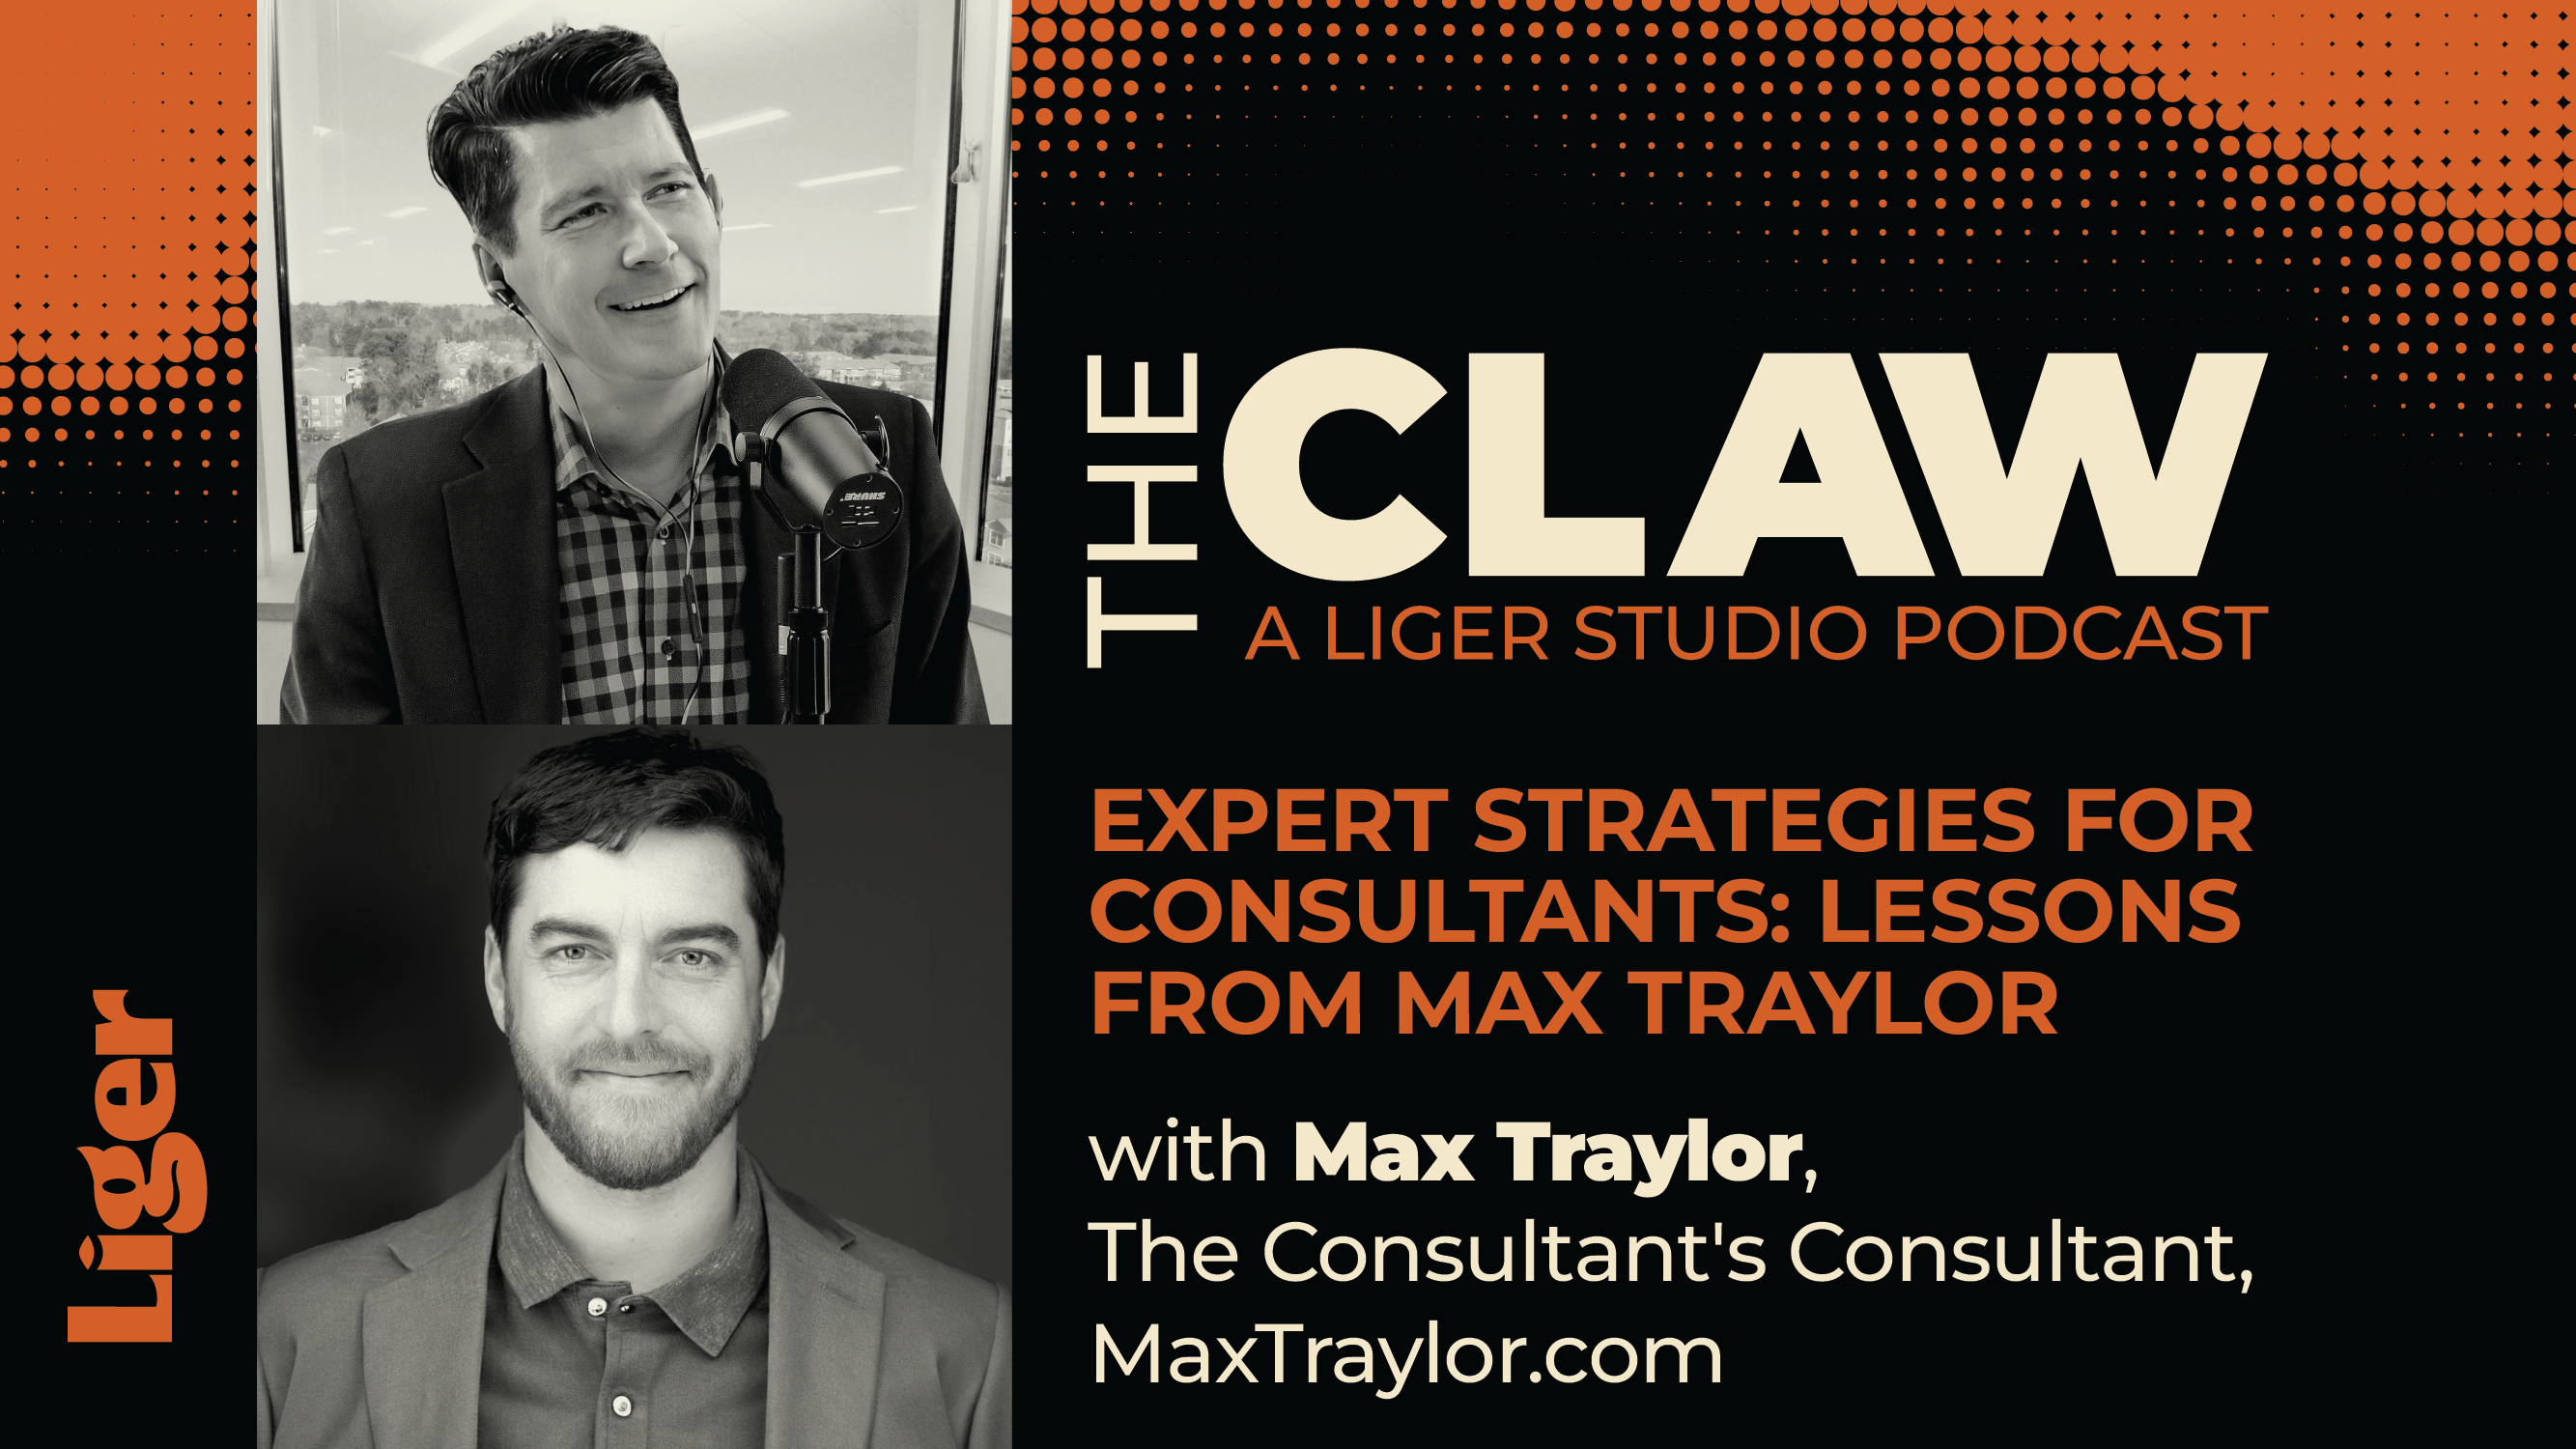 Expert Strategies For Consultants: Lessons From Max Traylor